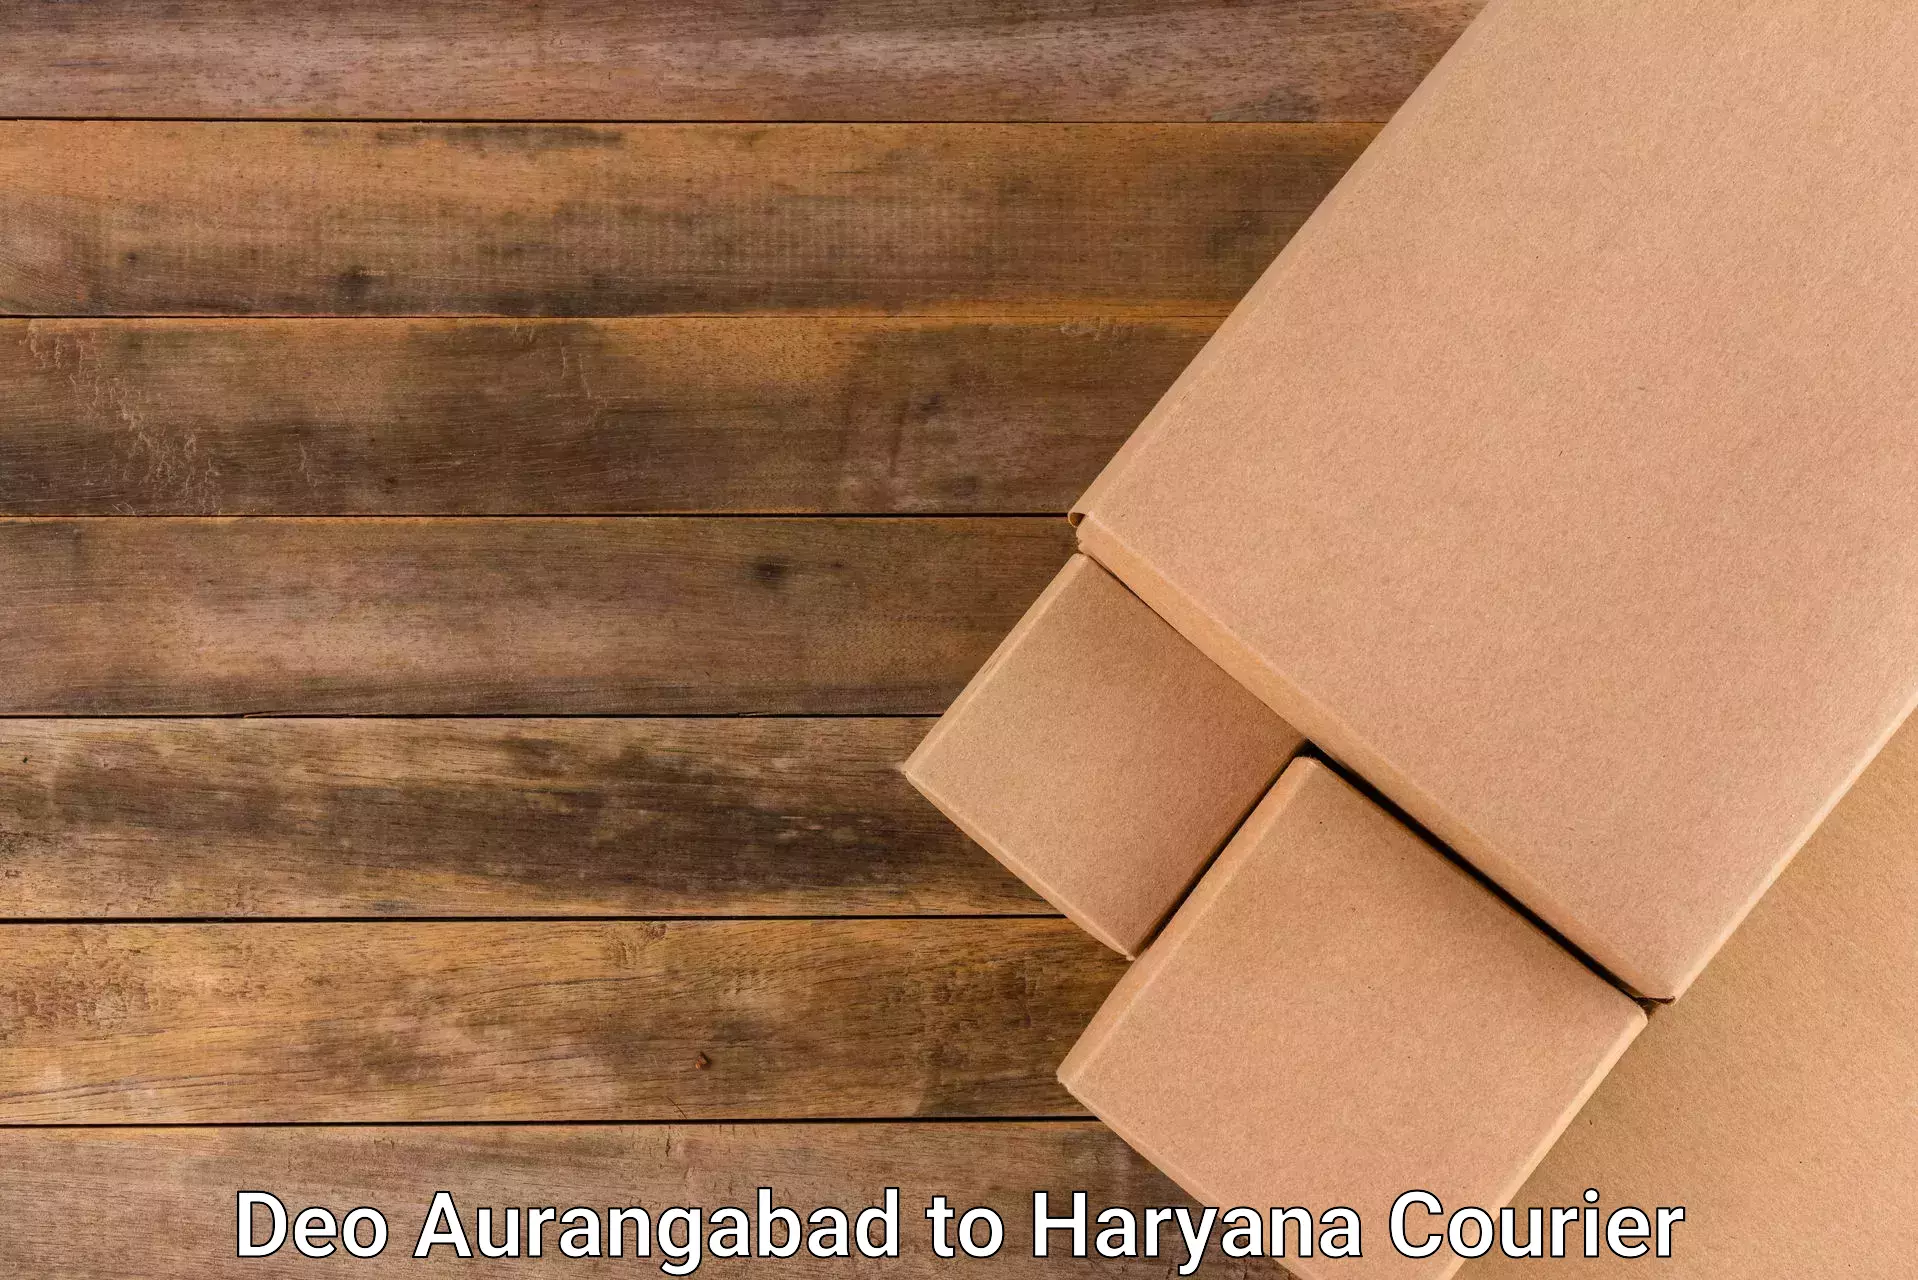 Business courier solutions Deo Aurangabad to Jhajjar